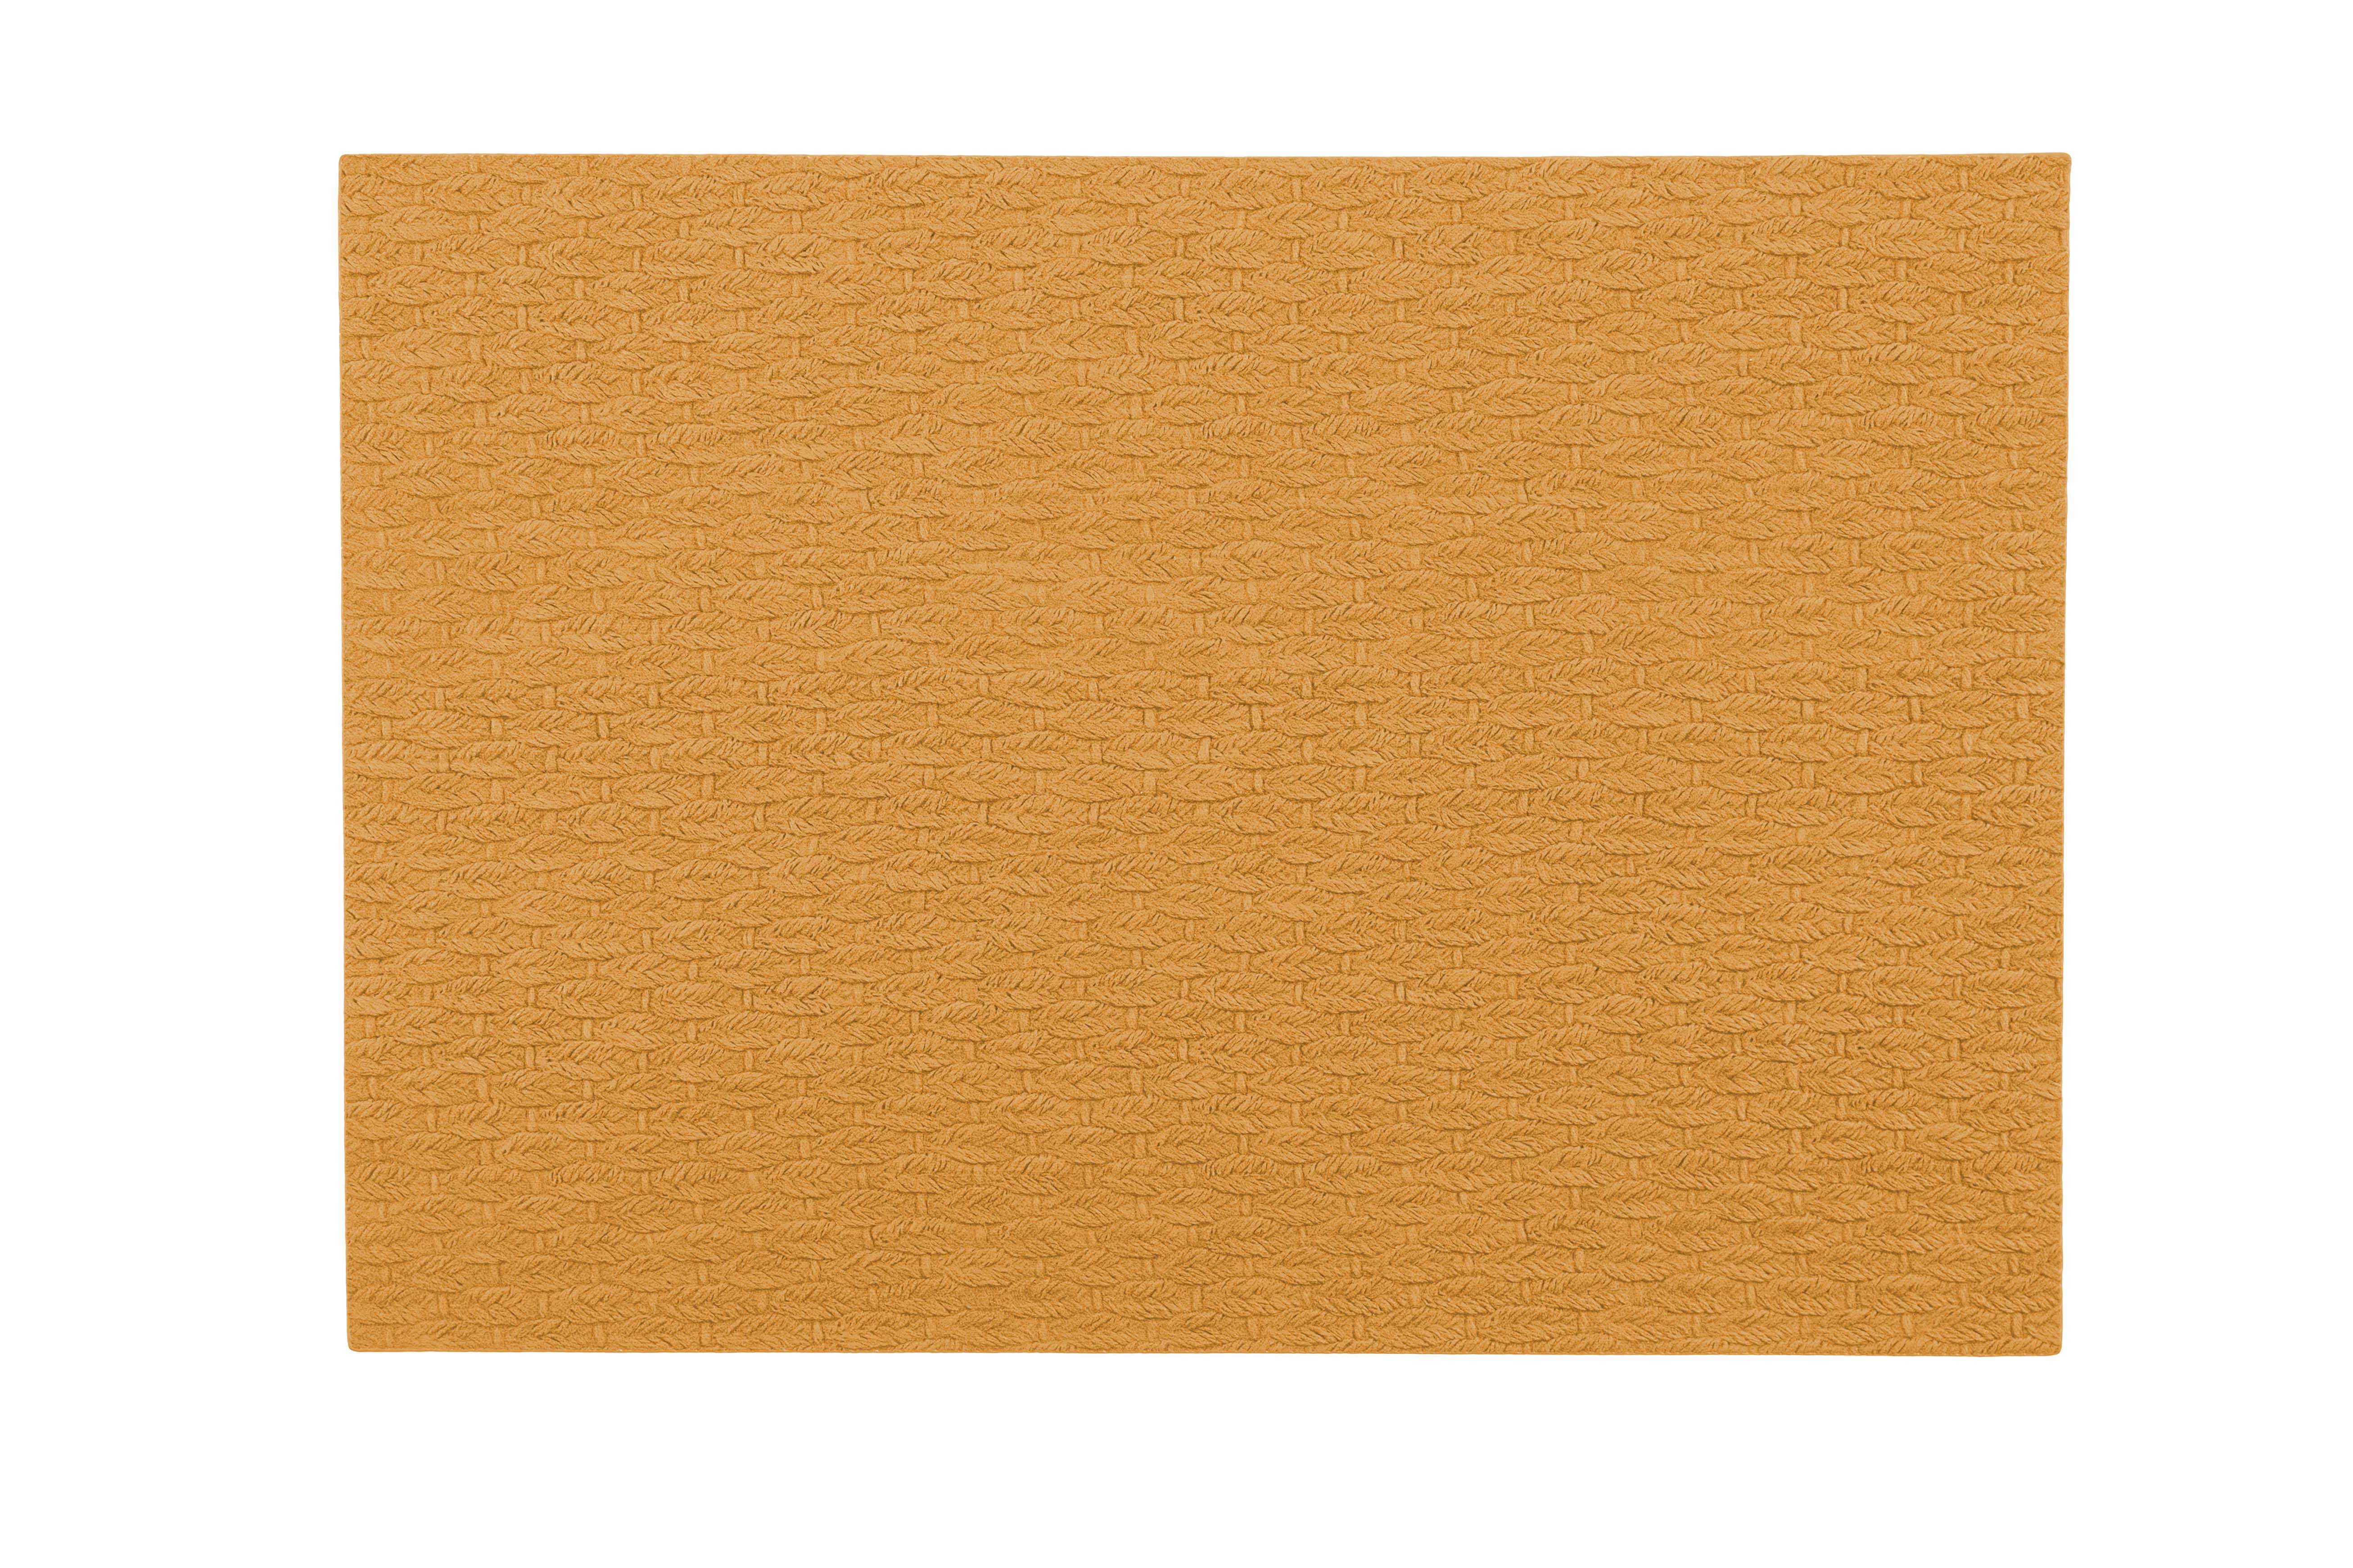 Placemat ARBIN - Leather look imitation - 45x33cm, taupe